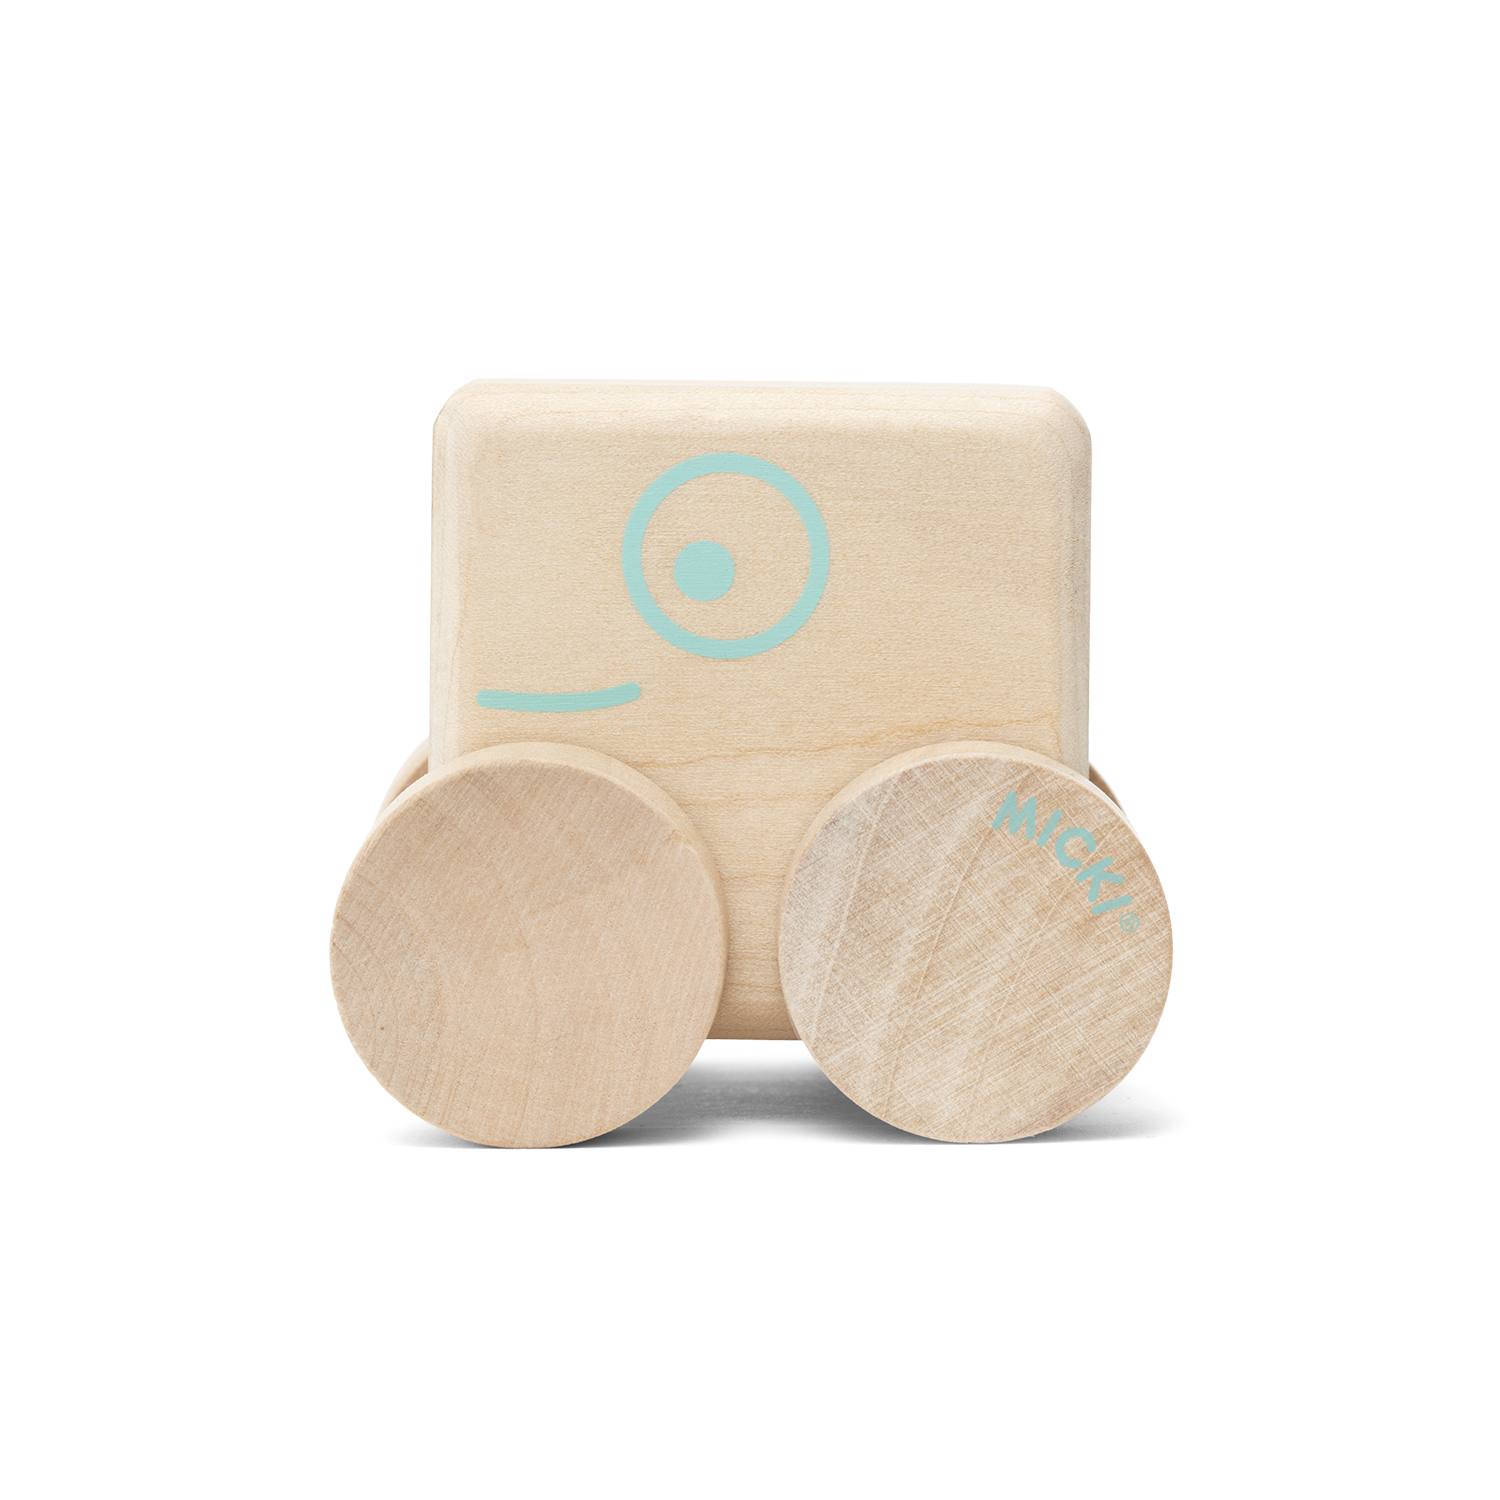 Toy cars micki toy car square natural wood